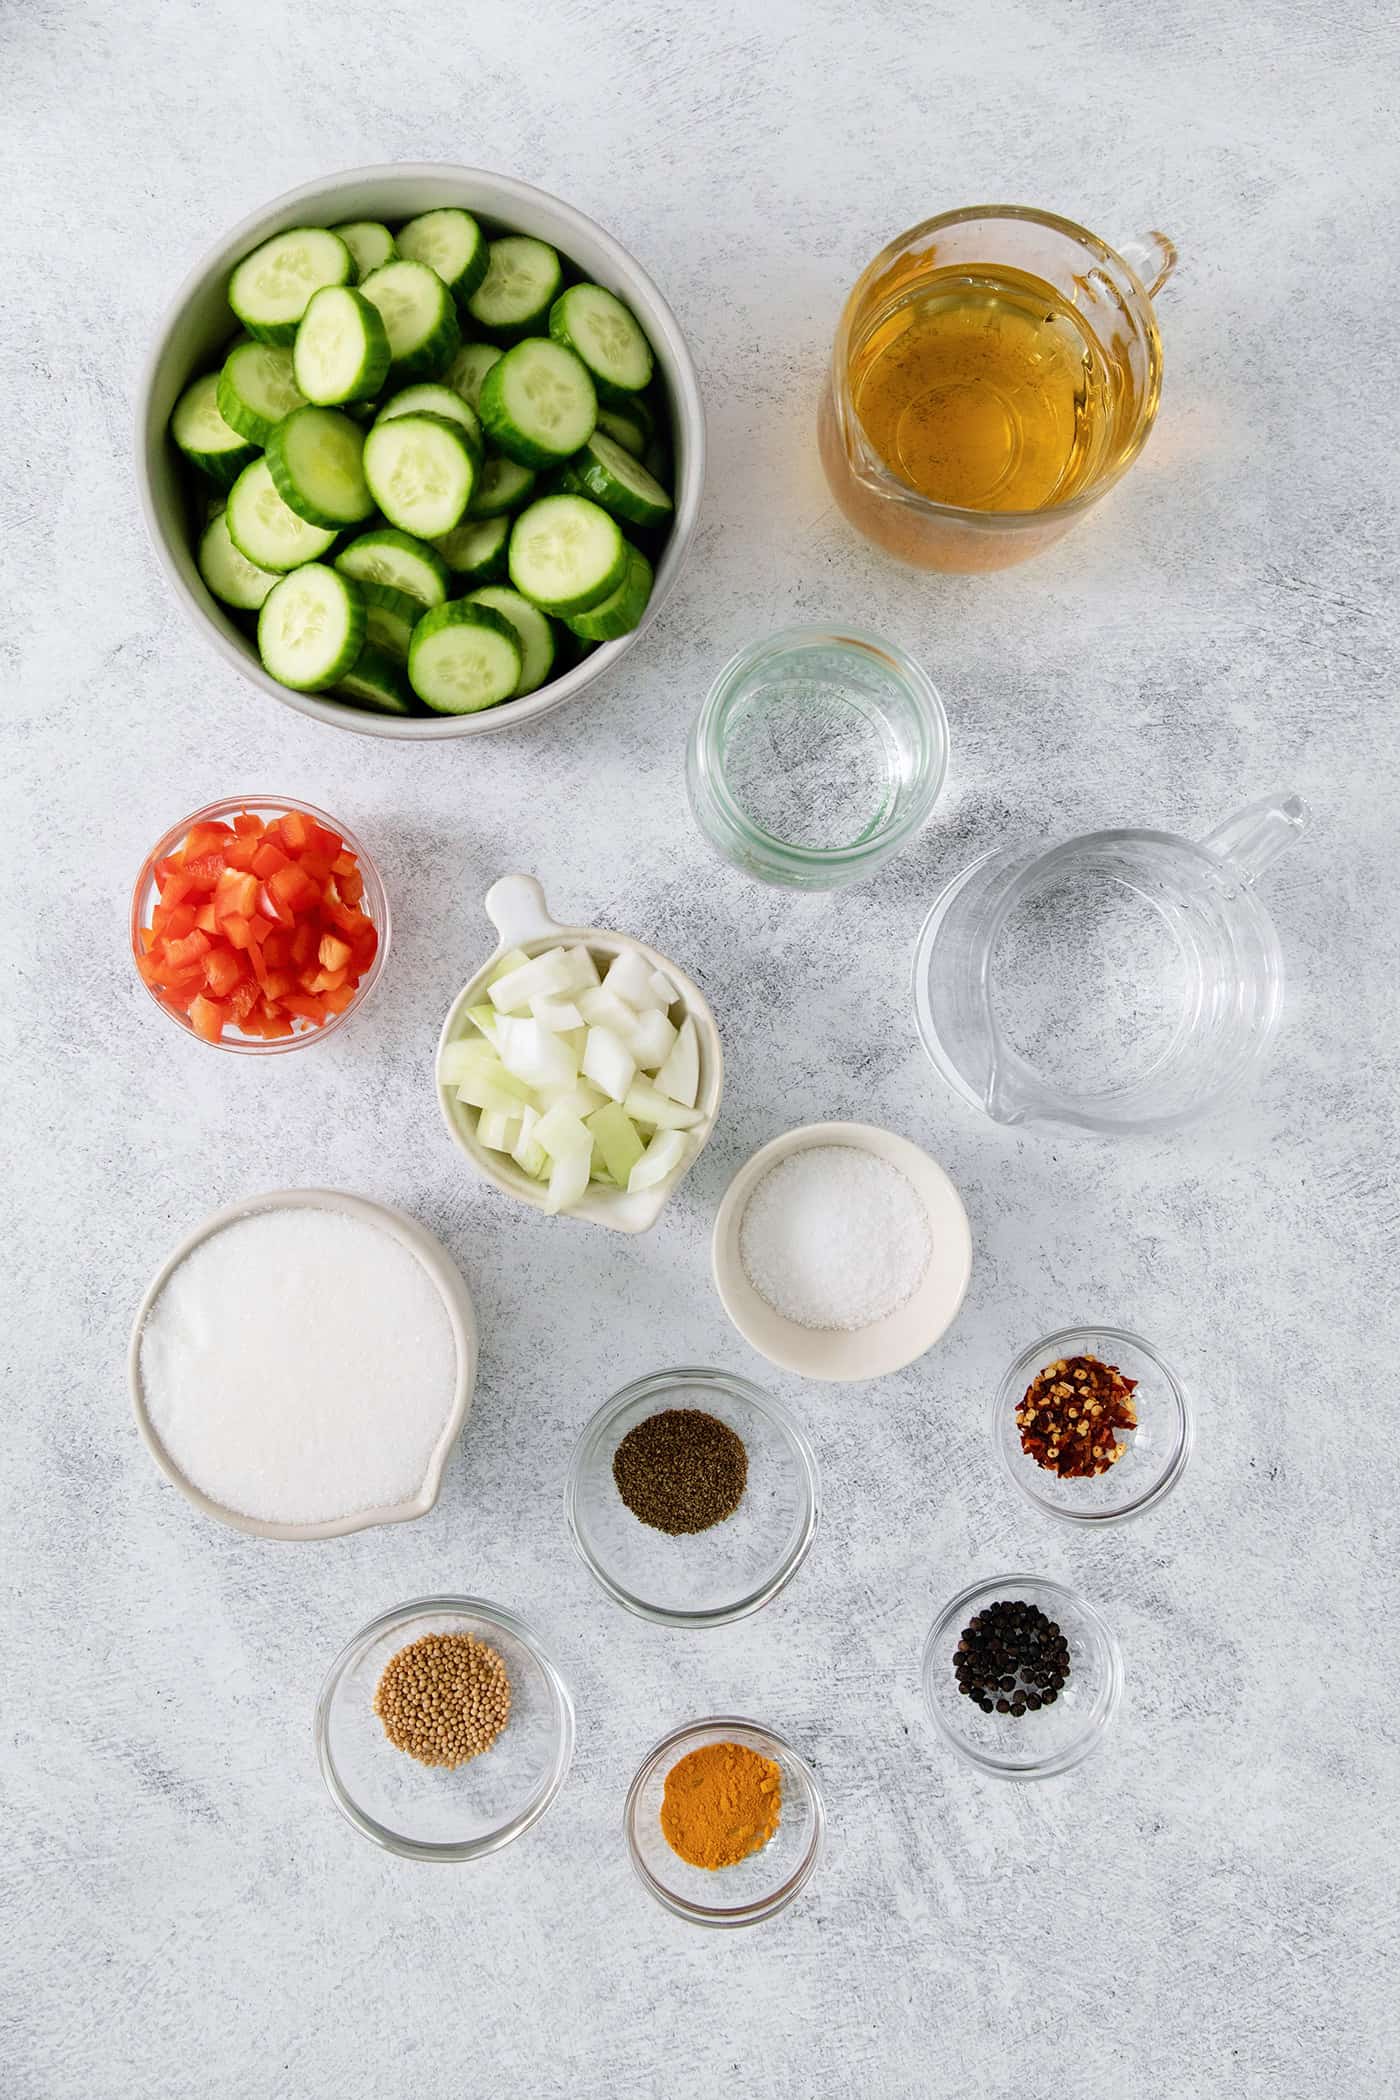 Ingredients needed for sweet and spicy pickles: cucumbers, bell pepper, onions, mustard and celery seeds, sugar, water.